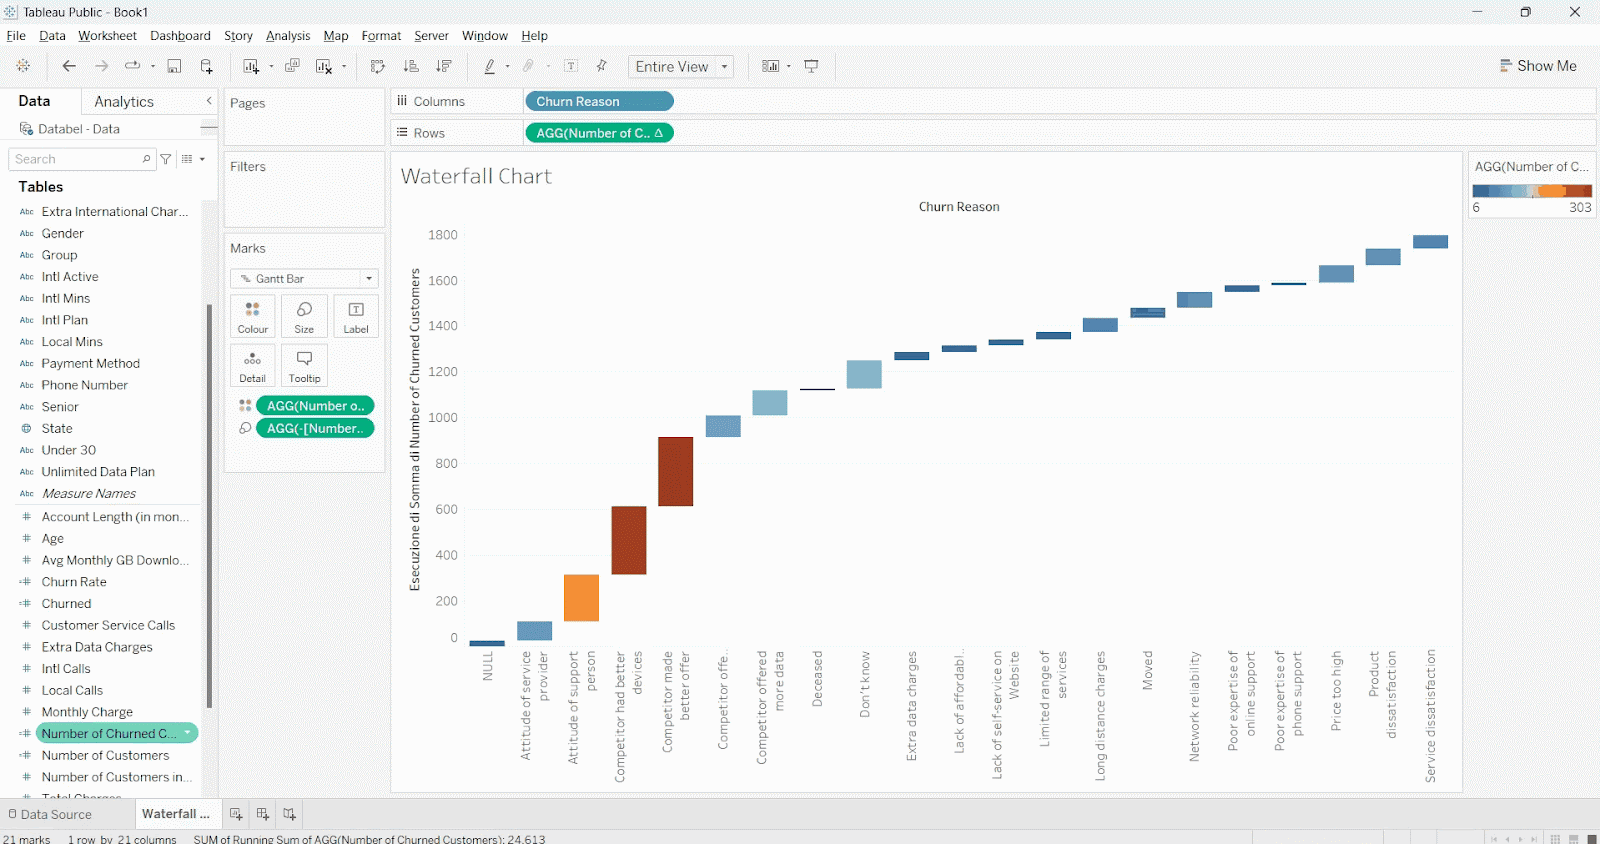 how to add a text label over each bar in a chart in Tableau